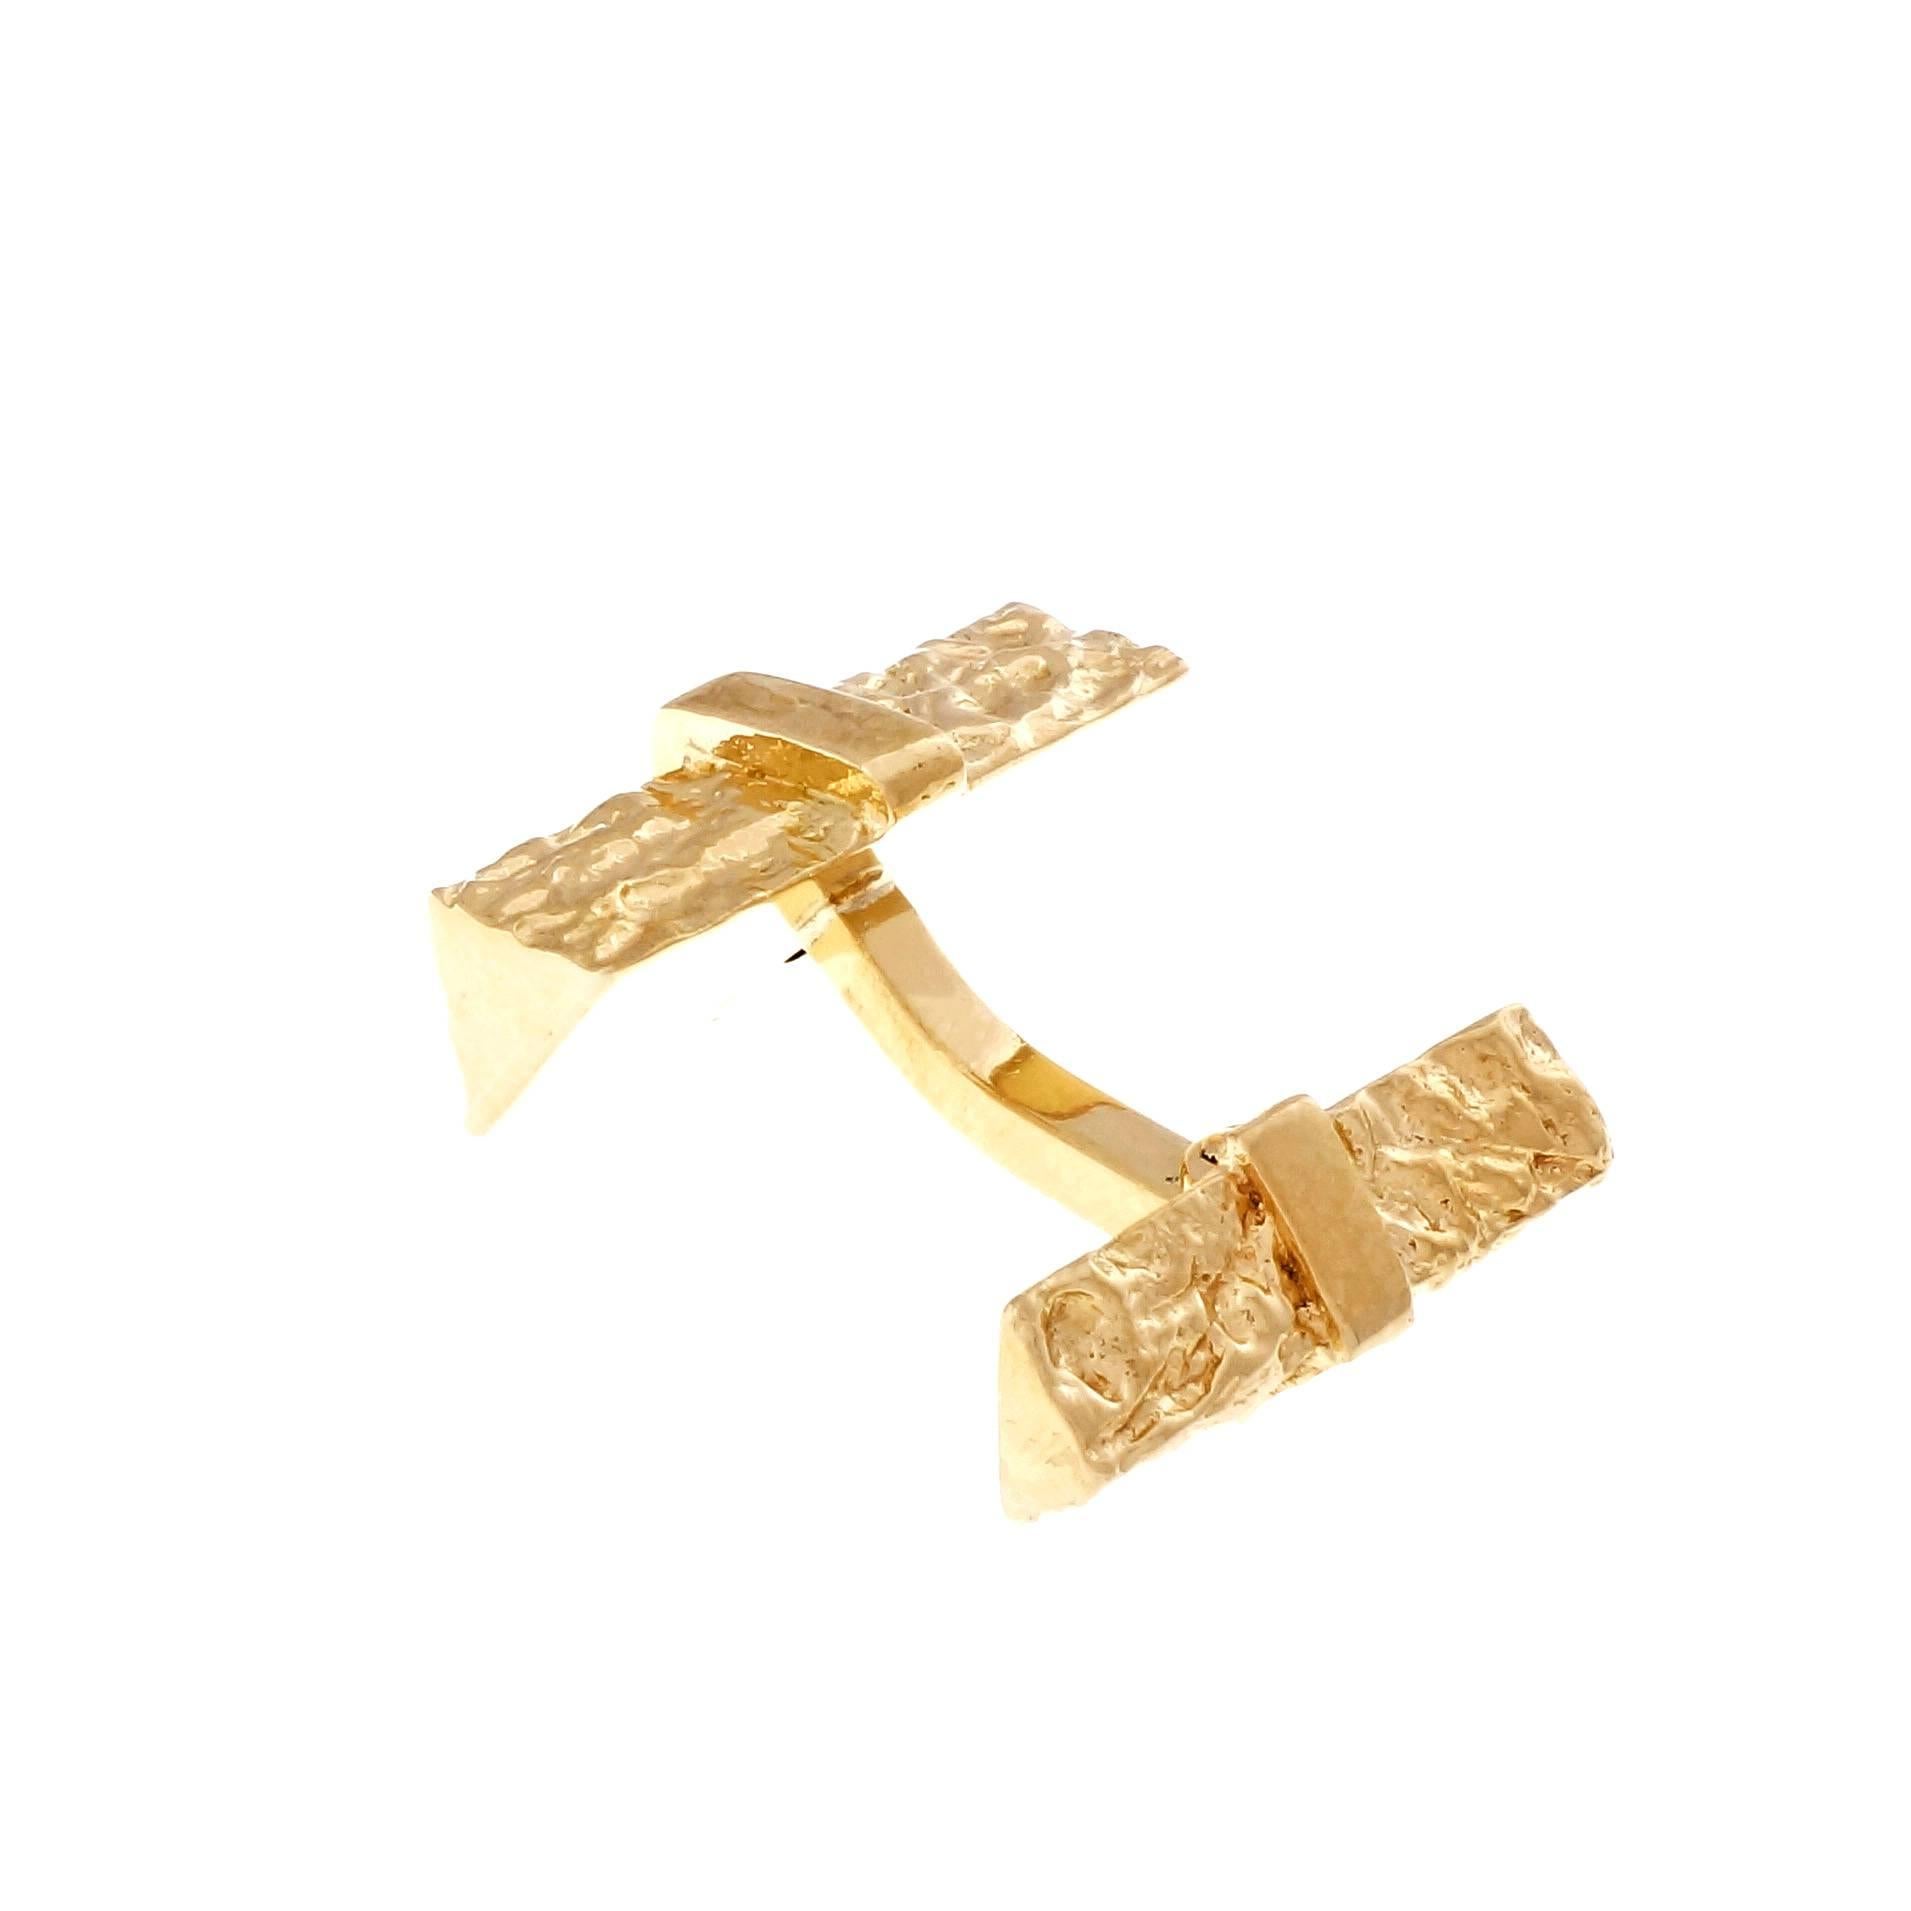 1960 18k yellow gold 2 sided angular bark design clip back cuff links.

18k yellow gold
Tested and stamped: 18k
Hallmark: 1
Top to bottom: 20.87mm or .82 inch
Width: 13.04mm or .51 inch
Depth: 7.21mm
22.4 grams
